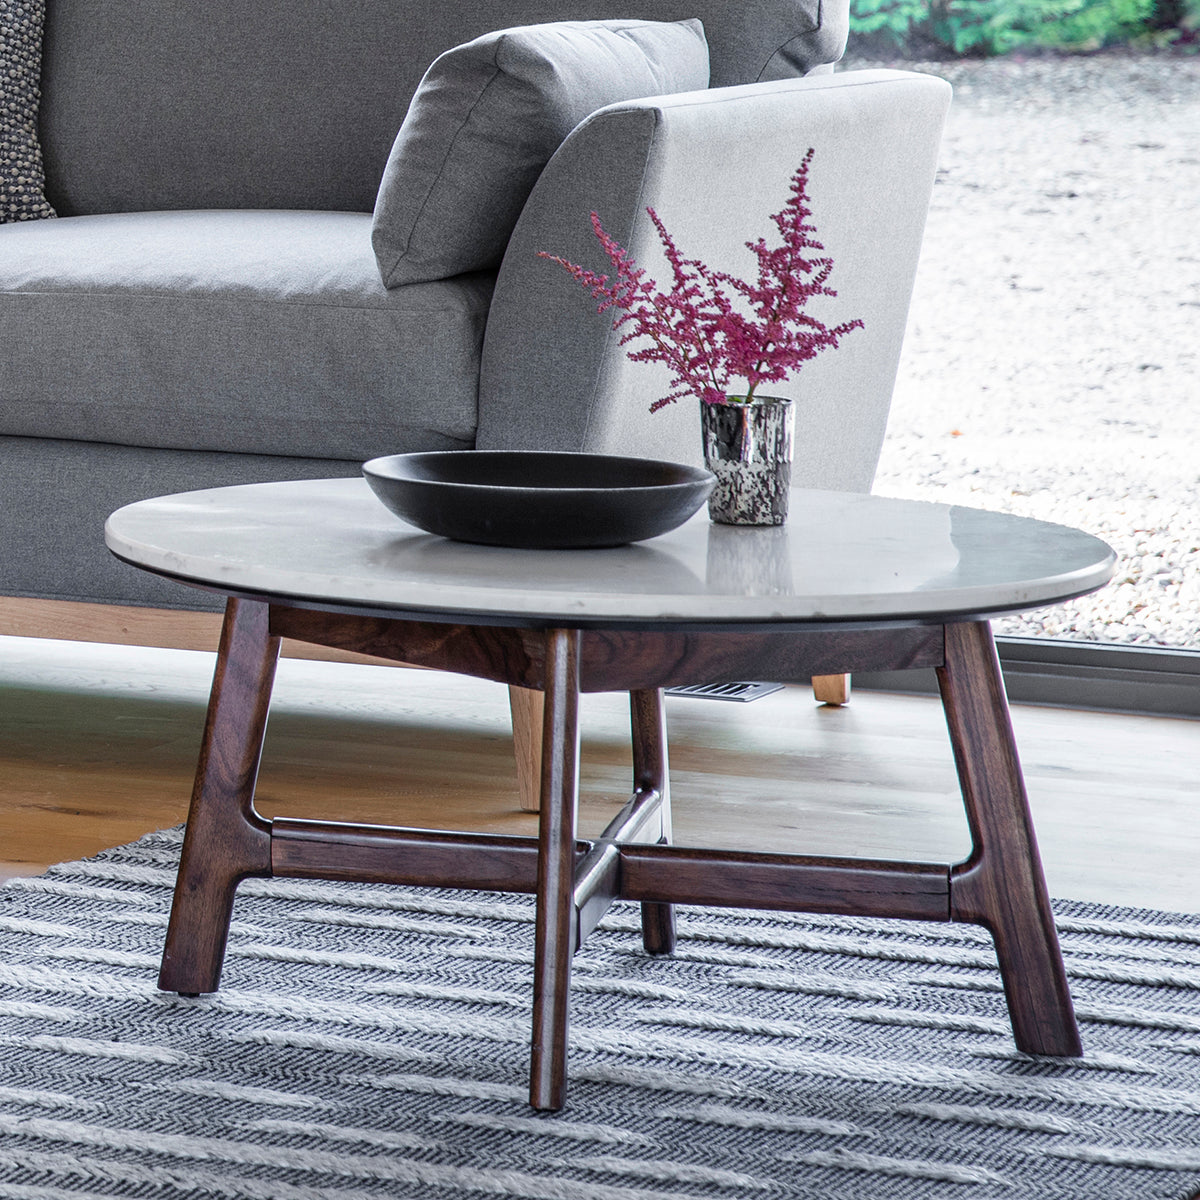 A 800x800x400mm Avonwick Round Coffee Table by Kikiathome.co.uk adds style to the living room's interior decor.